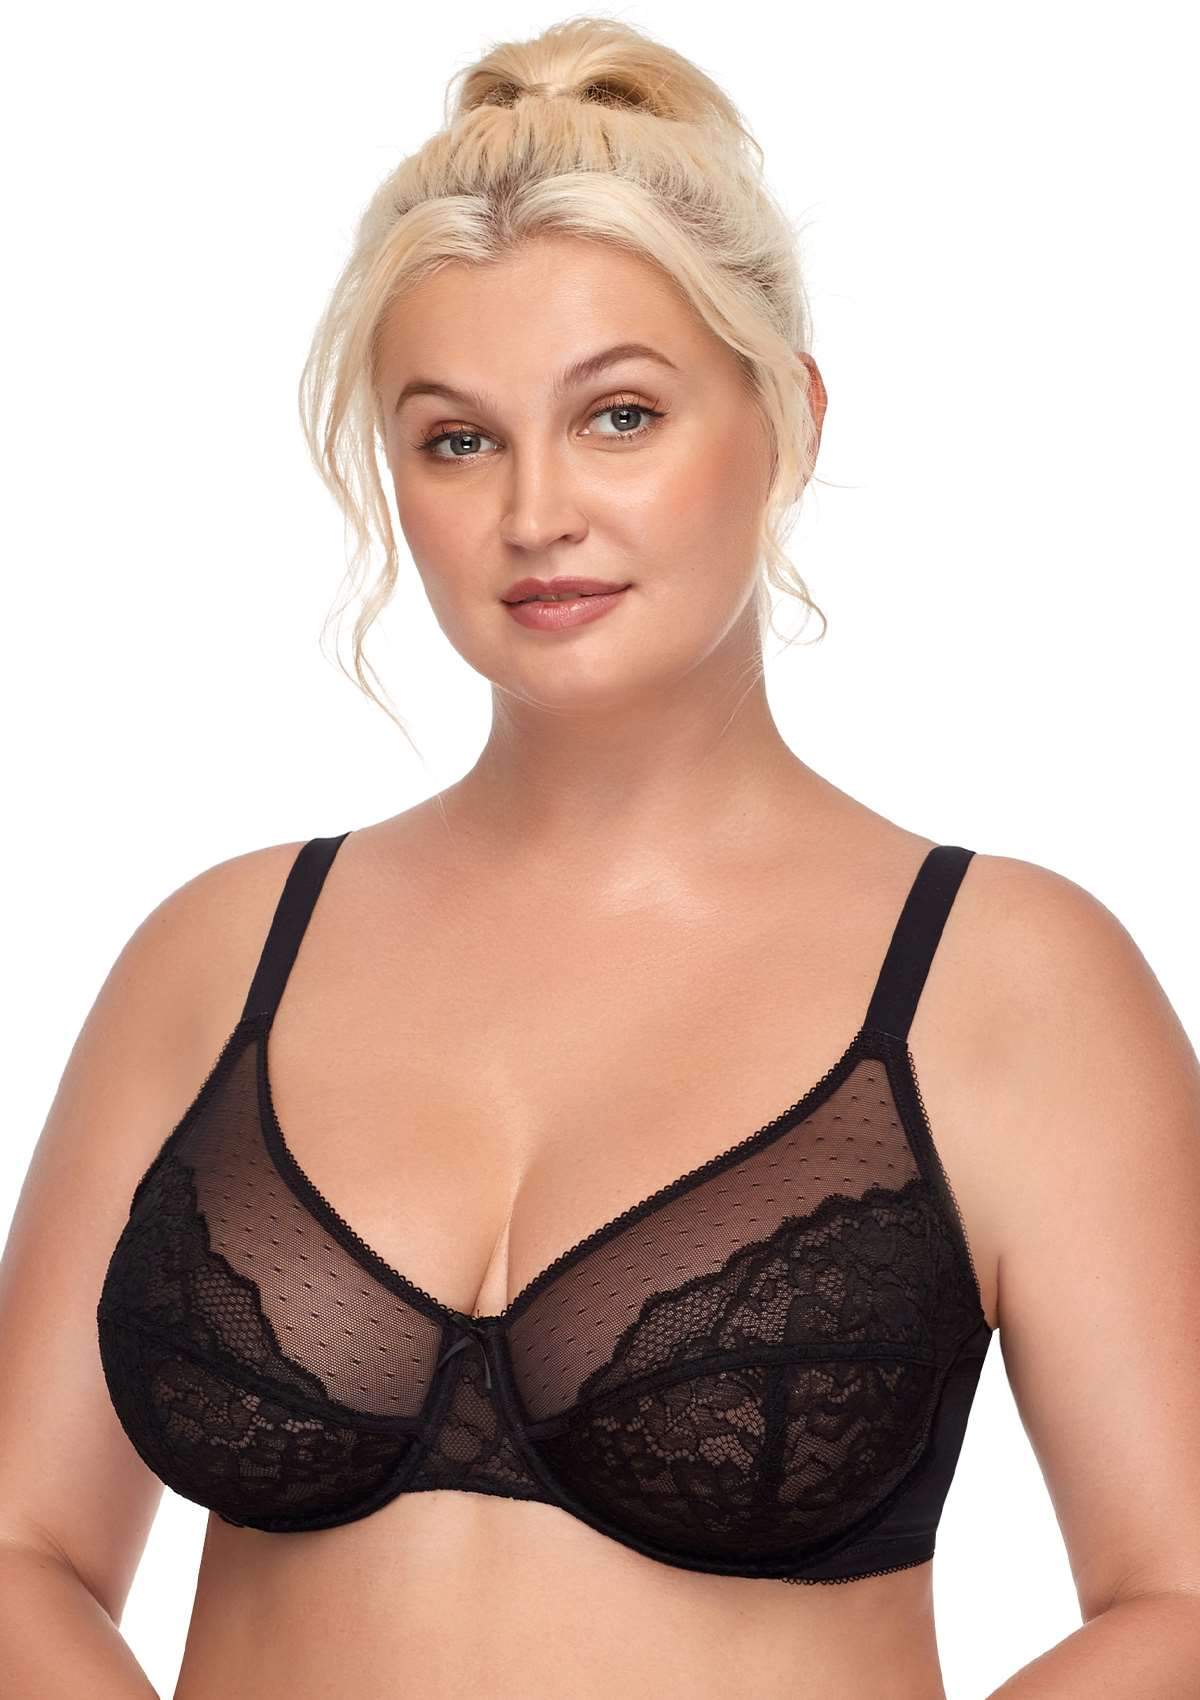 HSIA Enchante Lace Wire Bra For Lifting And Separating Large Breasts - Black / 46 / D